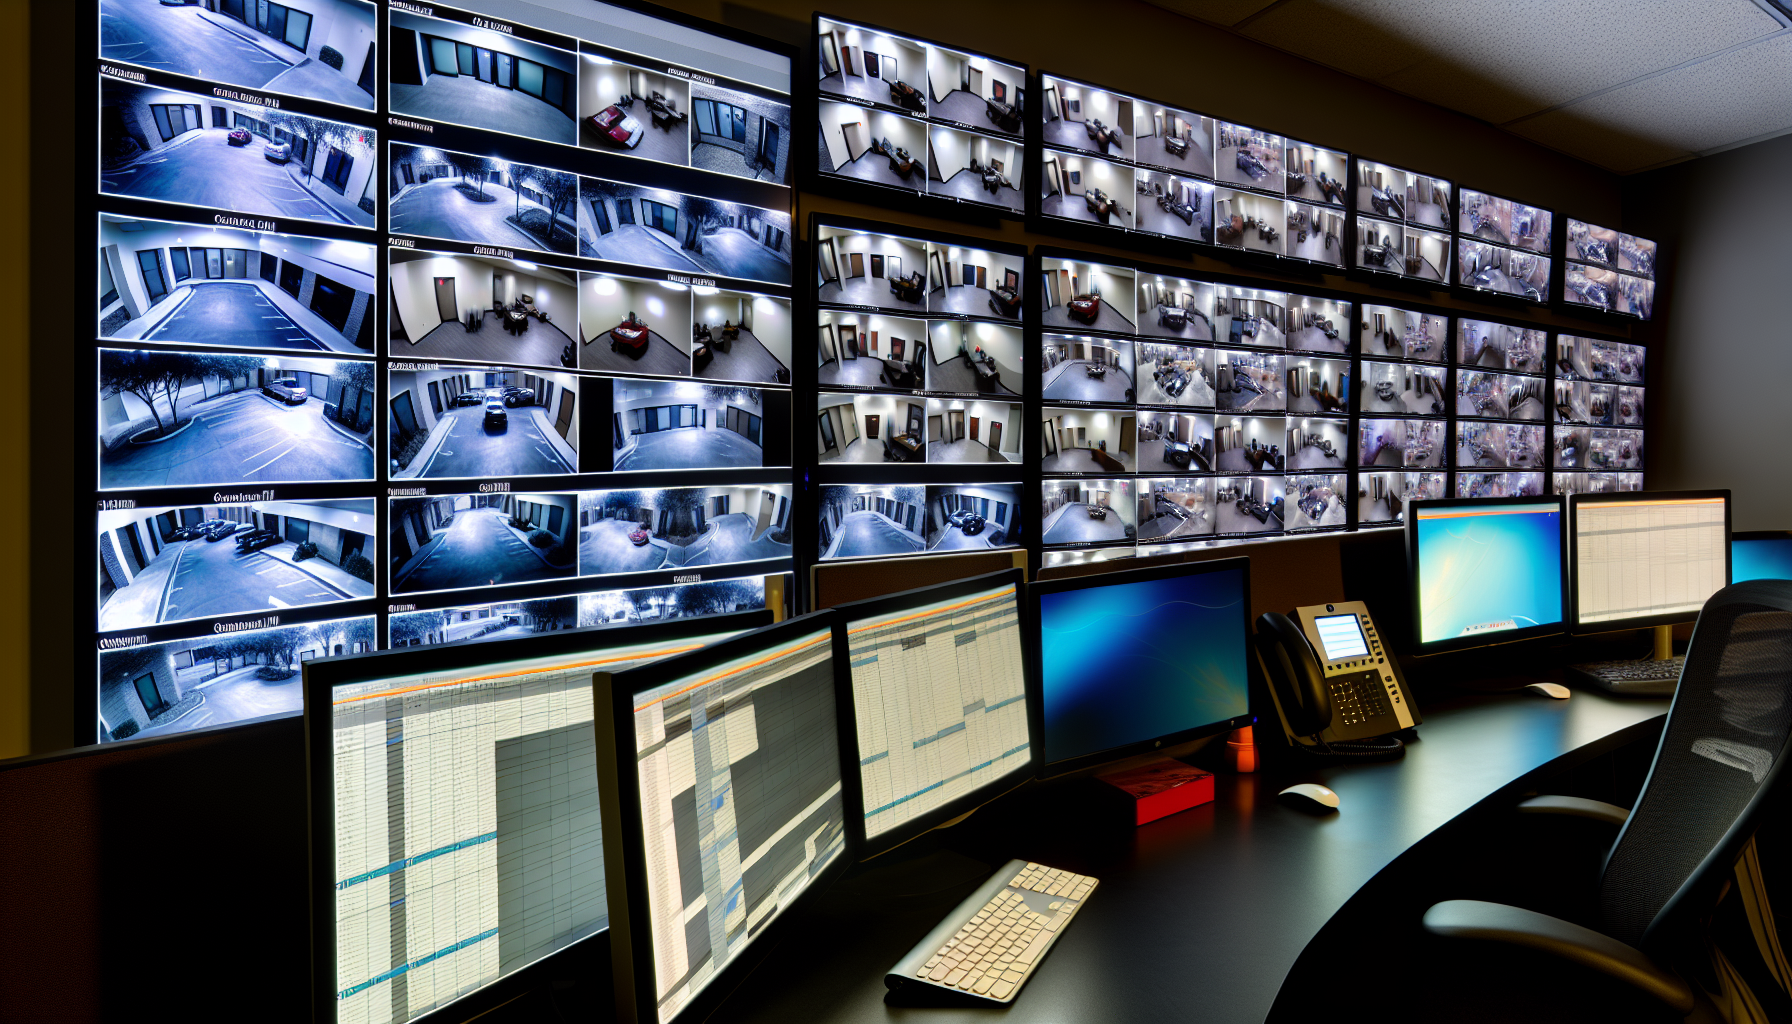 Live video monitoring station with multiple screens displaying various property locations in New Orleans